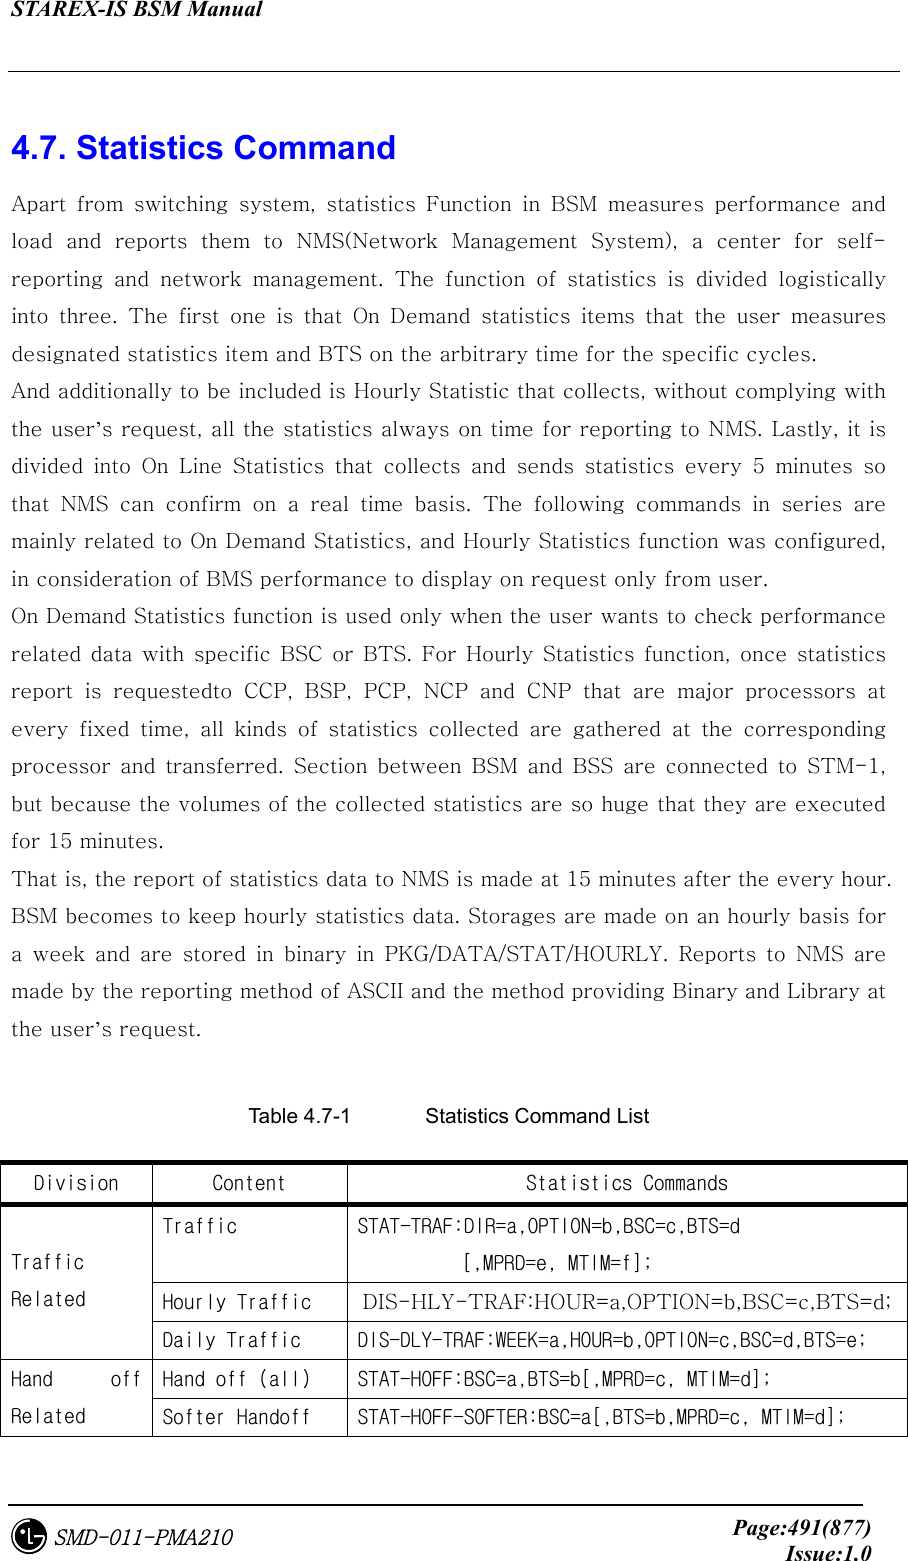 STAREX-IS BSM Manual     Page:491(877)Issue:1.0SMD-011-PMA210  4.7. Statistics Command Apart  from  switching  system,  statistics  Function  in  BSM  measures  performance  and load and reports them to NMS(Network Management System), a center for self-reporting  and  network  management.  The  function  of  statistics  is  divided  logistically into three. The first one is that On Demand statistics items that the user measures designated statistics item and BTS on the arbitrary time for the specific cycles. And additionally to be included is Hourly Statistic that collects, without complying with the user’s request, all the statistics always on time for reporting to NMS. Lastly, it is divided  into  On  Line  Statistics  that  collects  and  sends  statistics  every  5  minutes  so that NMS can confirm on a real time basis. The following commands  in  series  are mainly related to On Demand Statistics, and Hourly Statistics function was configured, in consideration of BMS performance to display on request only from user. On Demand Statistics function is used only when the user wants to check performance related data with specific BSC or BTS. For Hourly Statistics function,  once statistics report is requestedto CCP, BSP, PCP, NCP and CNP that are major  processors  at every  fixed  time,  all  kinds  of  statistics  collected  are  gathered  at  the  corresponding processor  and  transferred.  Section  between  BSM  and  BSS  are  connected  to  STM-1, but because the volumes of the collected statistics are so huge that they are executed for 15 minutes.   That is, the report of statistics data to NMS is made at 15 minutes after the every hour. BSM becomes to keep hourly statistics data. Storages are made on an hourly basis for a week and are stored in binary in PKG/DATA/STAT/HOURLY. Reports to NMS are made by the reporting method of ASCII and the method providing Binary and Library at the user’s request.  Table 4.7-1    Statistics Command List Division  Content  Statistics Commands Traffic  STAT-TRAF:DIR=a,OPTION=b,BSC=c,BTS=d [,MPRD=e, MTIM=f]; Hourly Traffic  DIS-HLY-TRAF:HOUR=a,OPTION=b,BSC=c,BTS=d; Traffic Related Daily Traffic  DIS-DLY-TRAF:WEEK=a,HOUR=b,OPTION=c,BSC=d,BTS=e; Hand off (all)  STAT-HOFF:BSC=a,BTS=b[,MPRD=c, MTIM=d]; Hand  off Related  Softer Handoff  STAT-HOFF-SOFTER:BSC=a[,BTS=b,MPRD=c, MTIM=d]; 